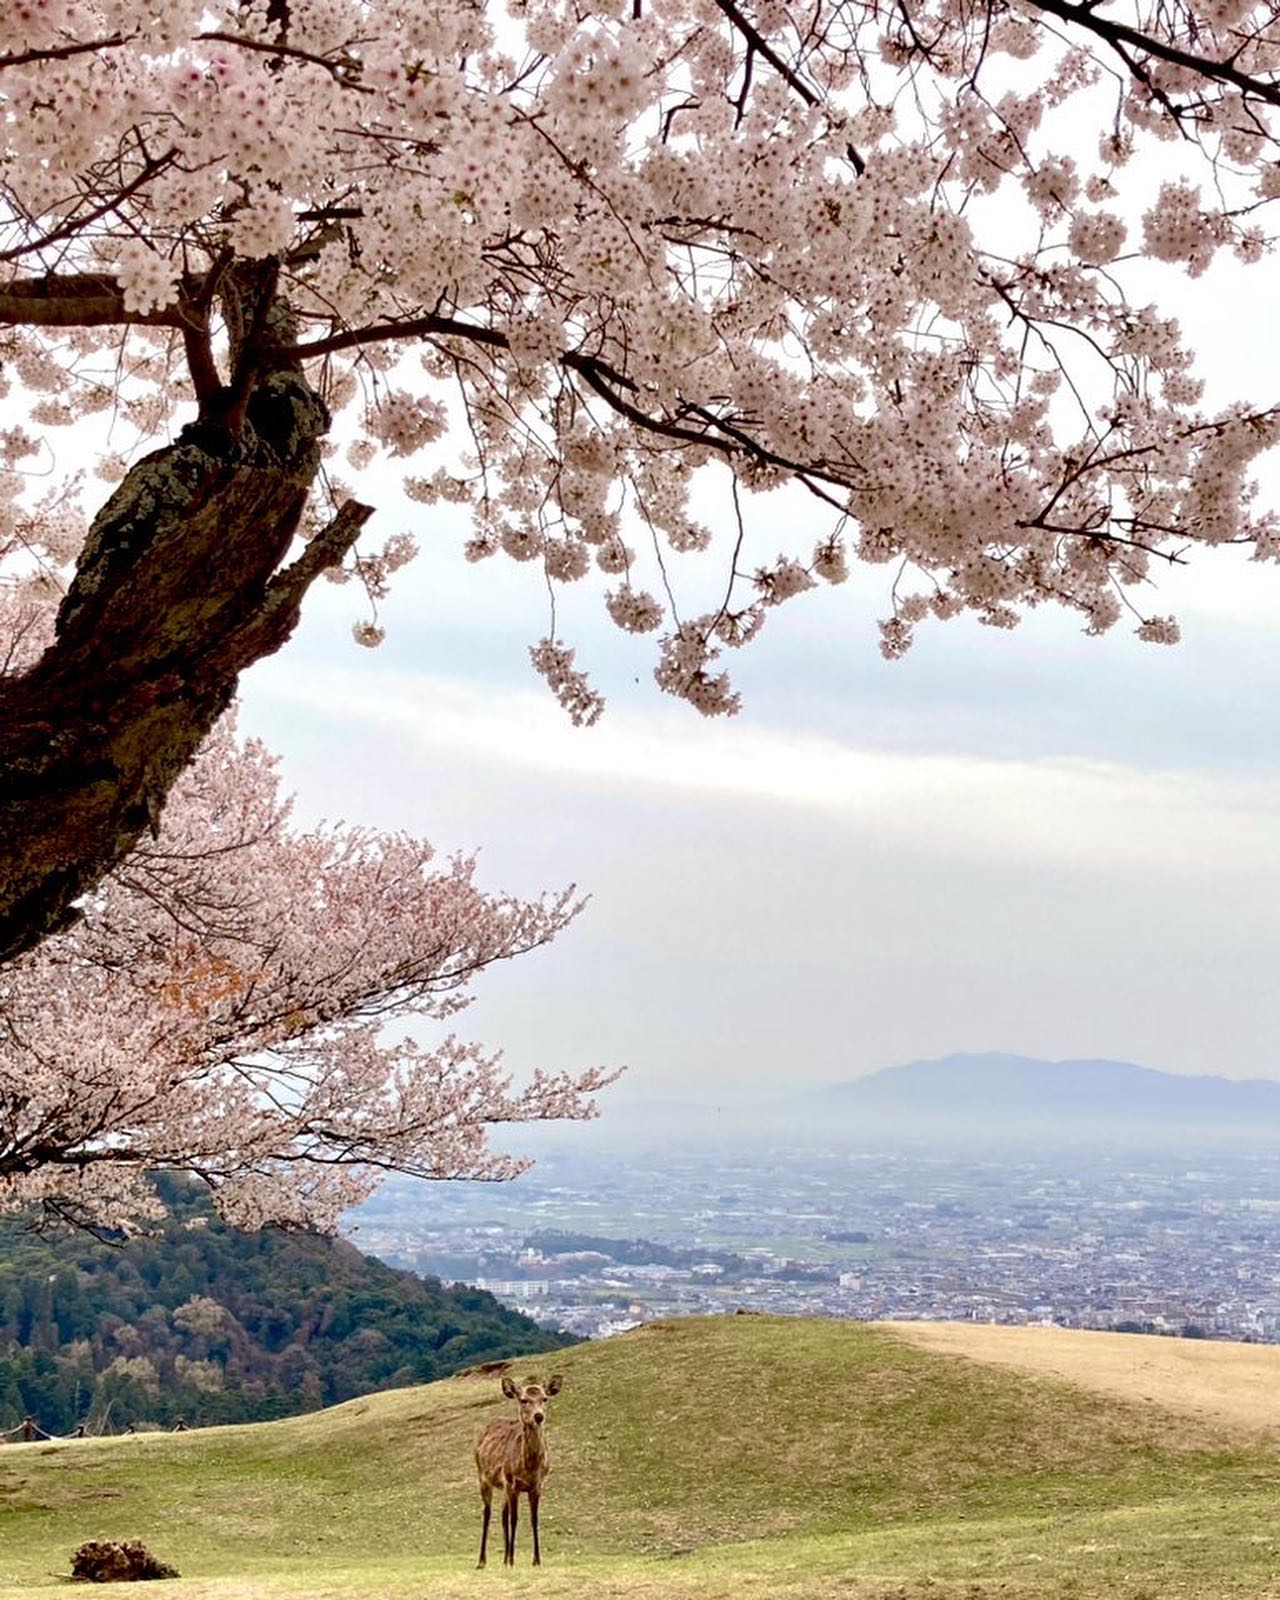 Cherry Blossoms in Japan - Nara Park